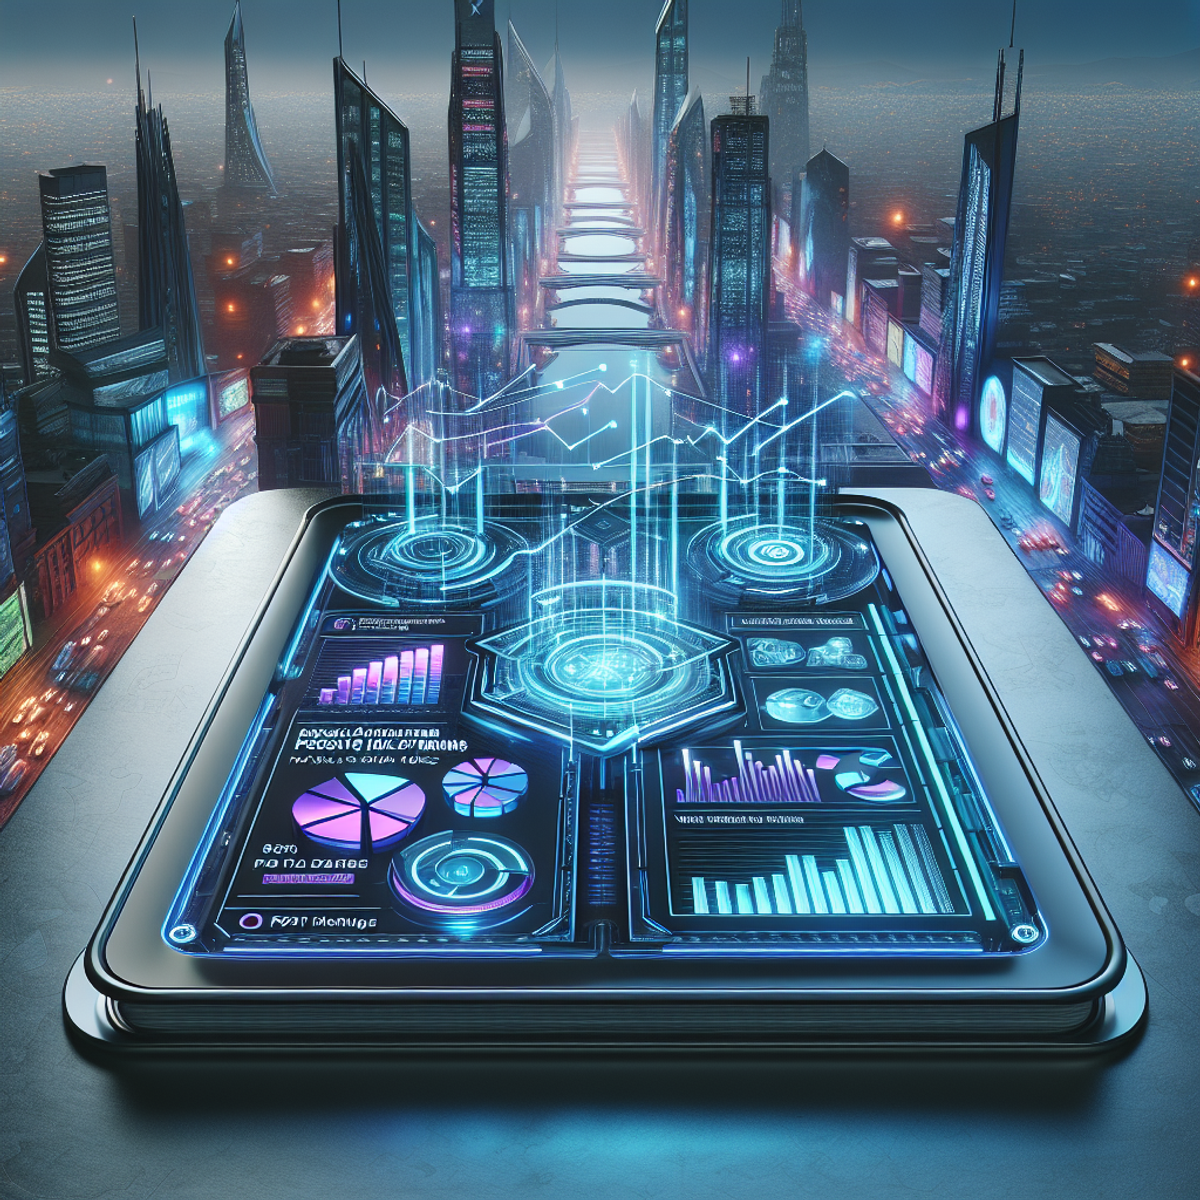 A futuristic visualization of the book cover for "Investment Strategies for Passive Income Streams in 2024: What's New and What Works". The cover consists of a sleek metallic table with a holographic display showing various financial graphs, pie-charts, and statistics projected from a futuristic device. The book's title is prominently displayed at the top in bold, electric blue letters. The backdrop of the cover is complex cityscape at twilight with skyscrapers, glowing billboards, and flying cars to impart a sense of the year 2024.